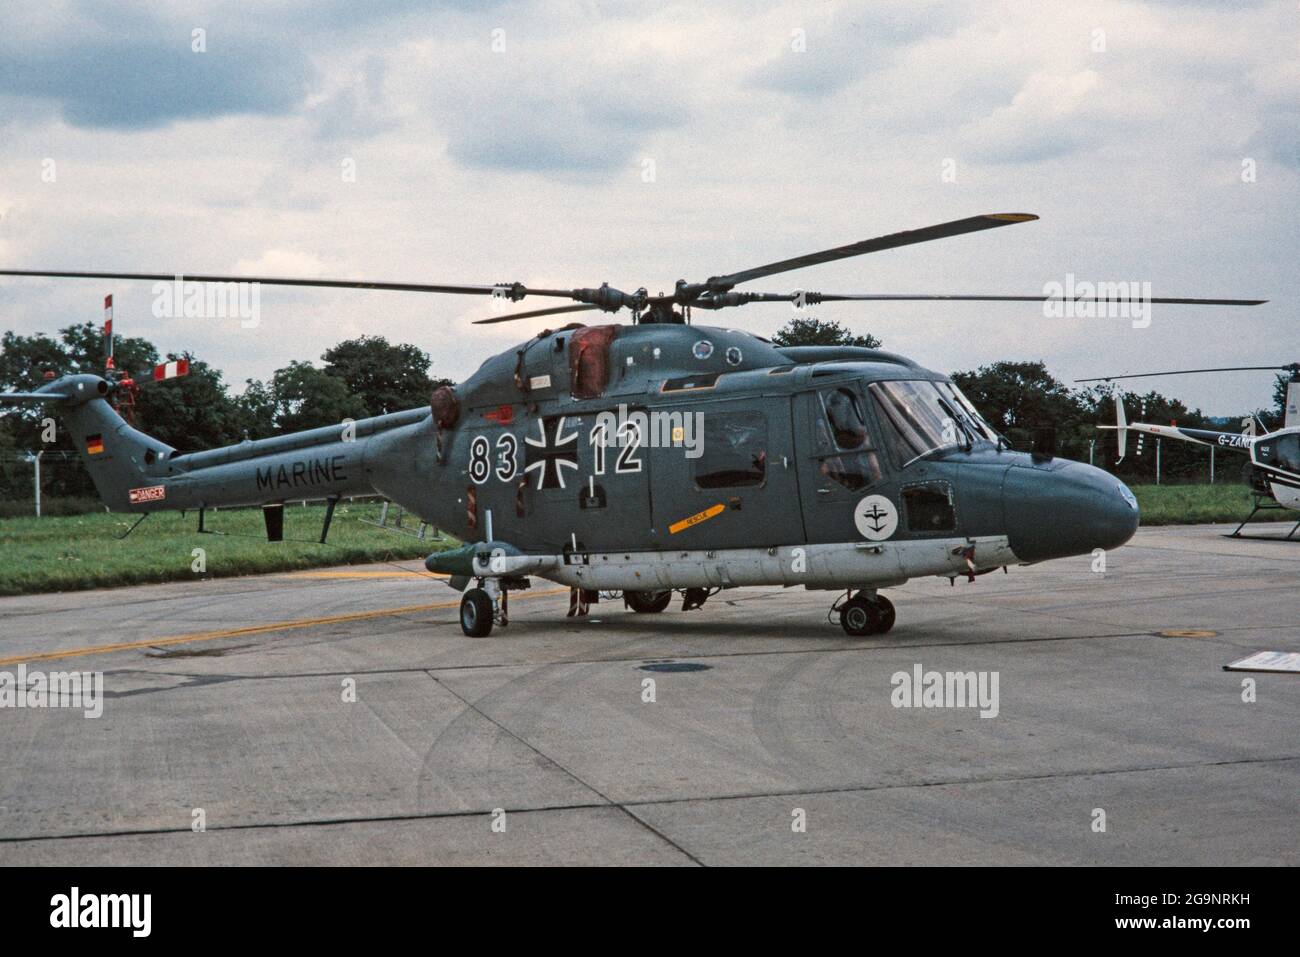 A German Navy Westland Lynx Mk 88A anti submarine helicopter, at RAF Fairford Airshow in England  in July 1991. Serial number 83+12. Stock Photo